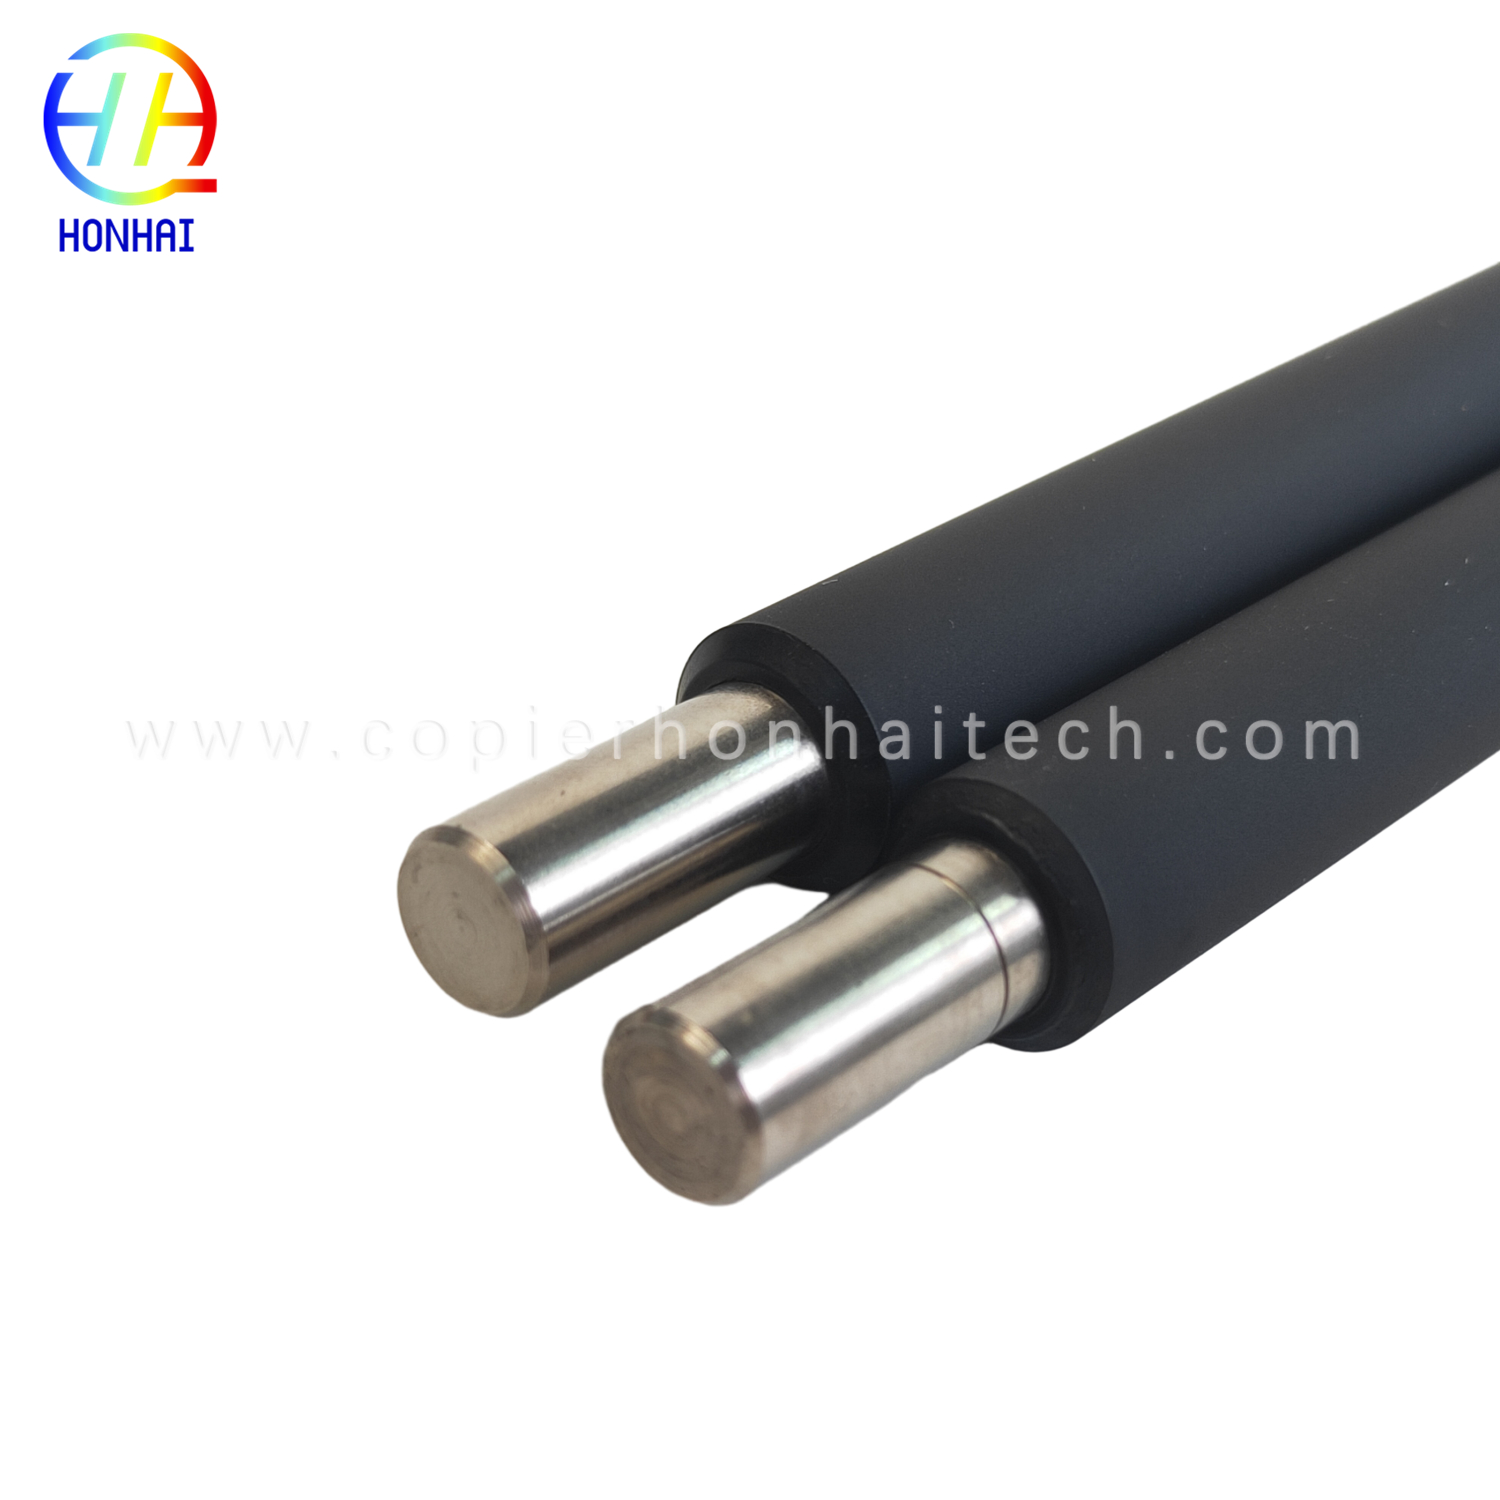 https://www.copierhonhaitech.com/primary-charger-roller-for-xerox-workcentre-7830-7835-7845-7855-pcr-product/